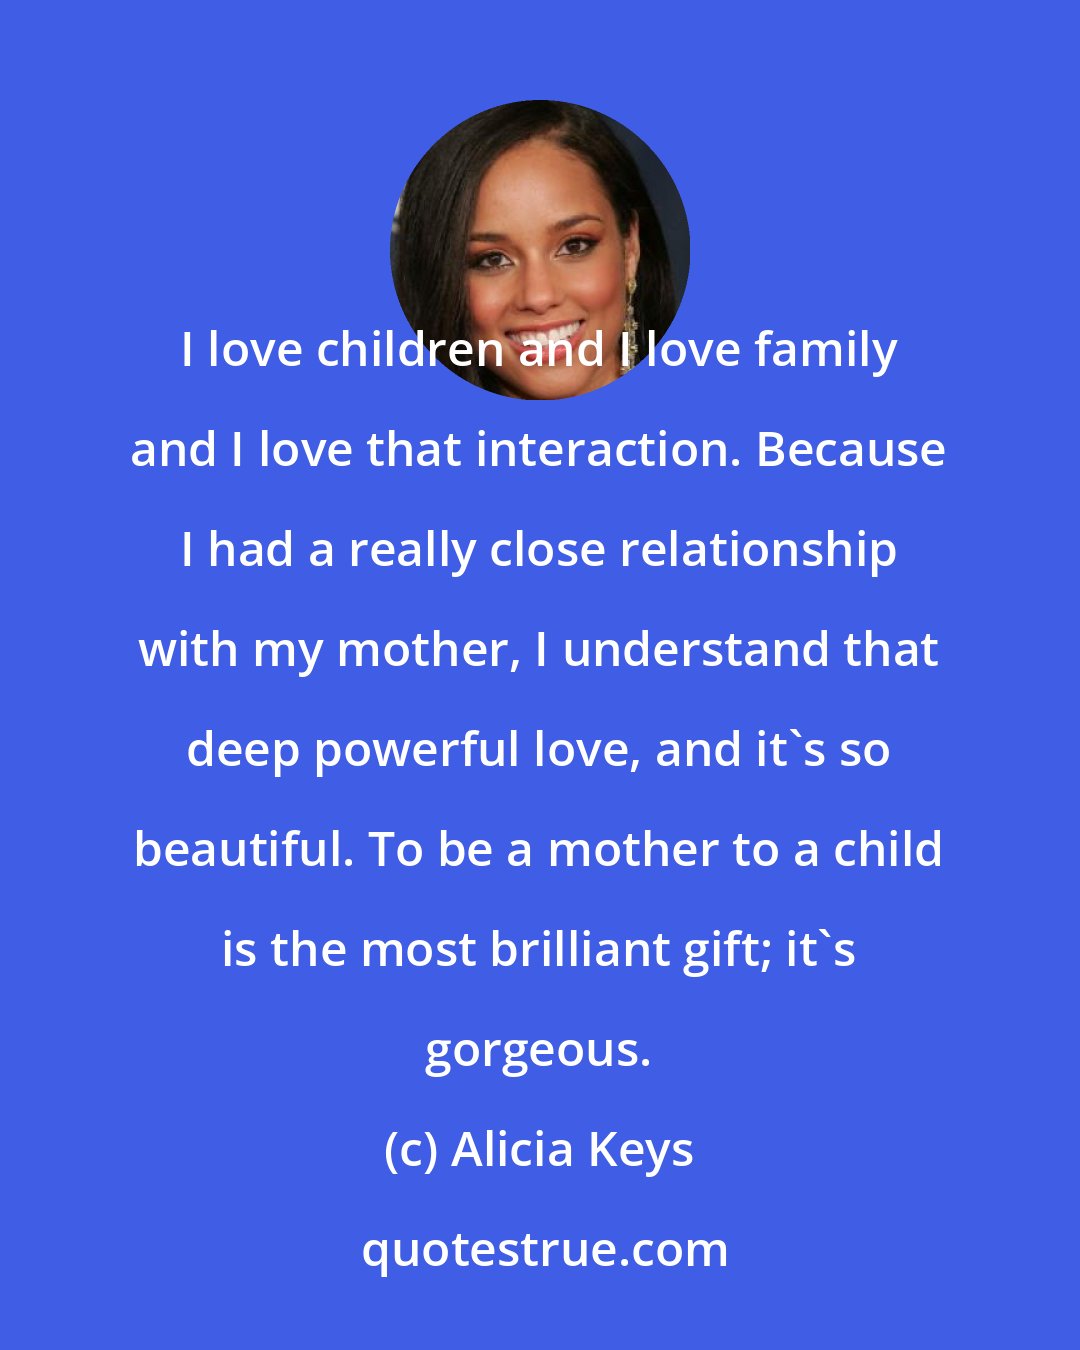 Alicia Keys: I love children and I love family and I love that interaction. Because I had a really close relationship with my mother, I understand that deep powerful love, and it's so beautiful. To be a mother to a child is the most brilliant gift; it's gorgeous.